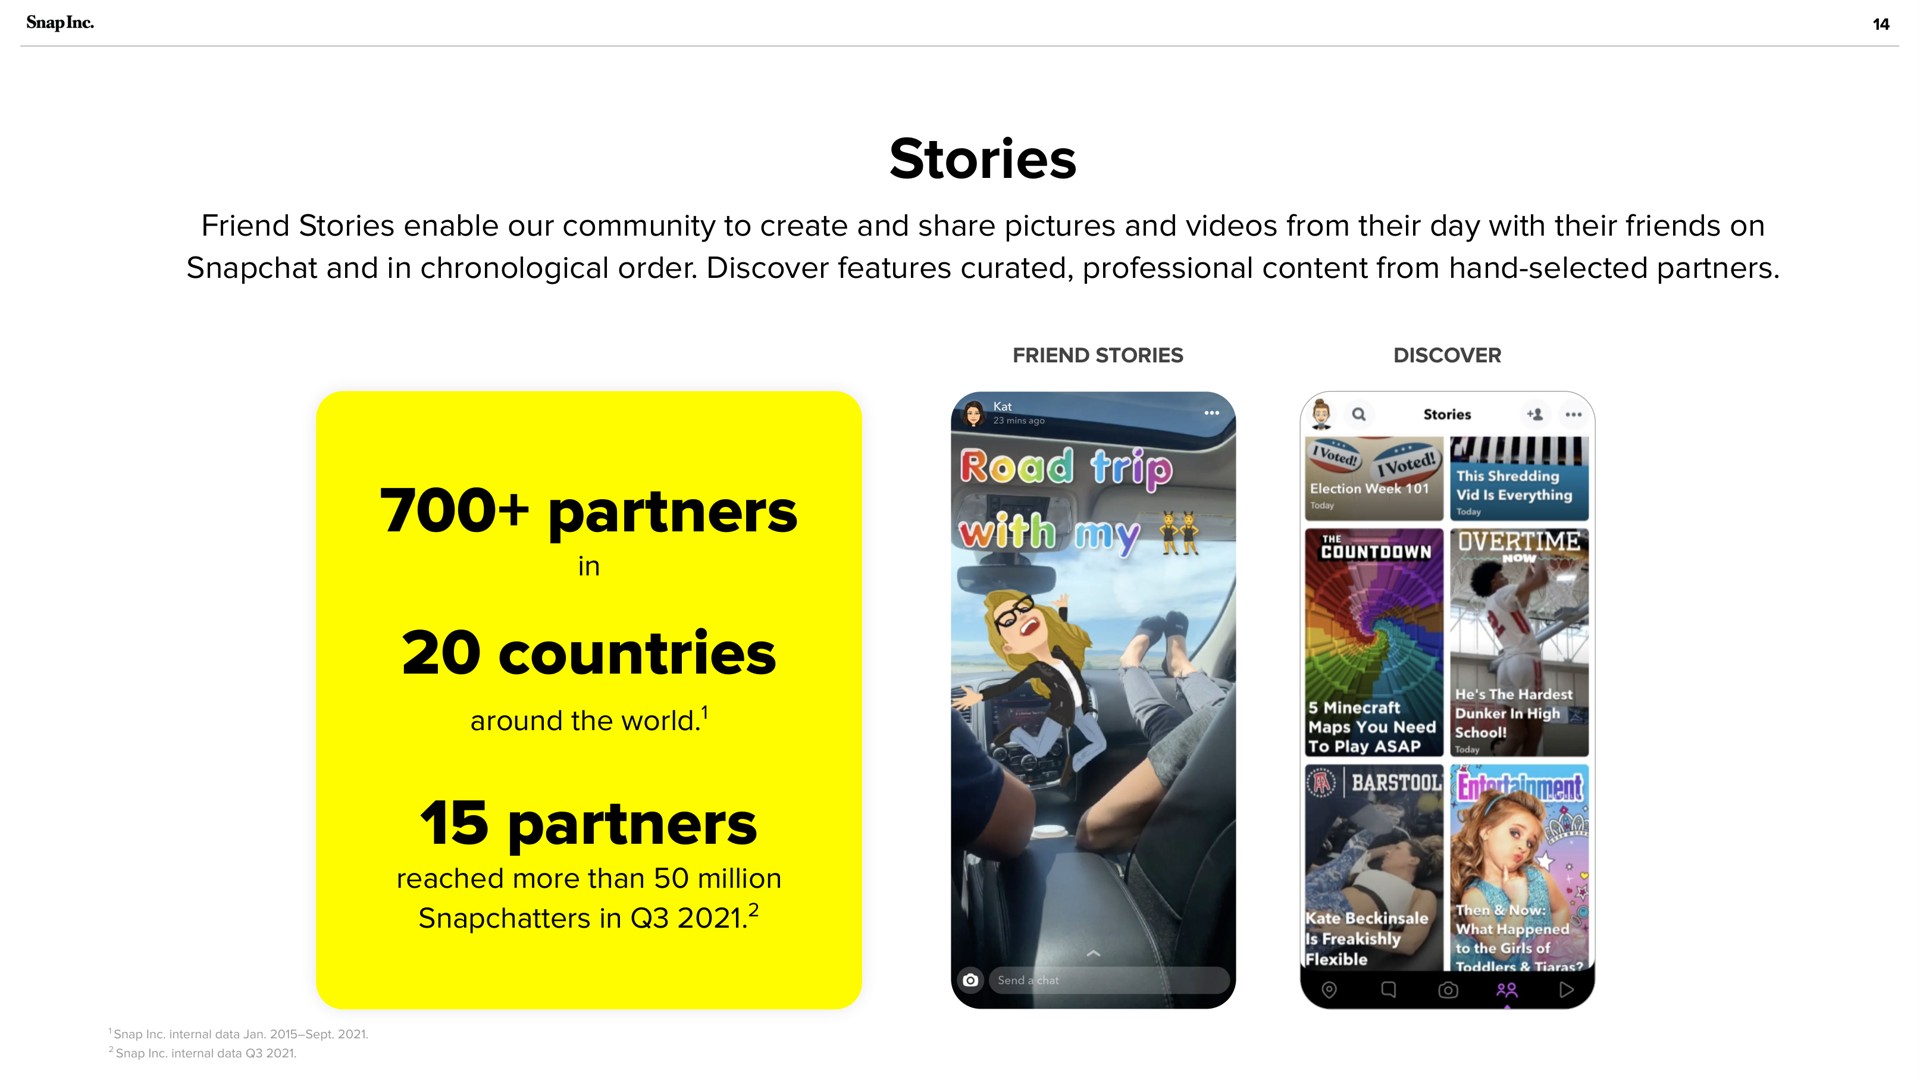 stories partners countries partners friend enable our community to create and share pictures and videos from their day with their friends on and in chronological order discover features professional content from hand selected around the world in | Snap Inc